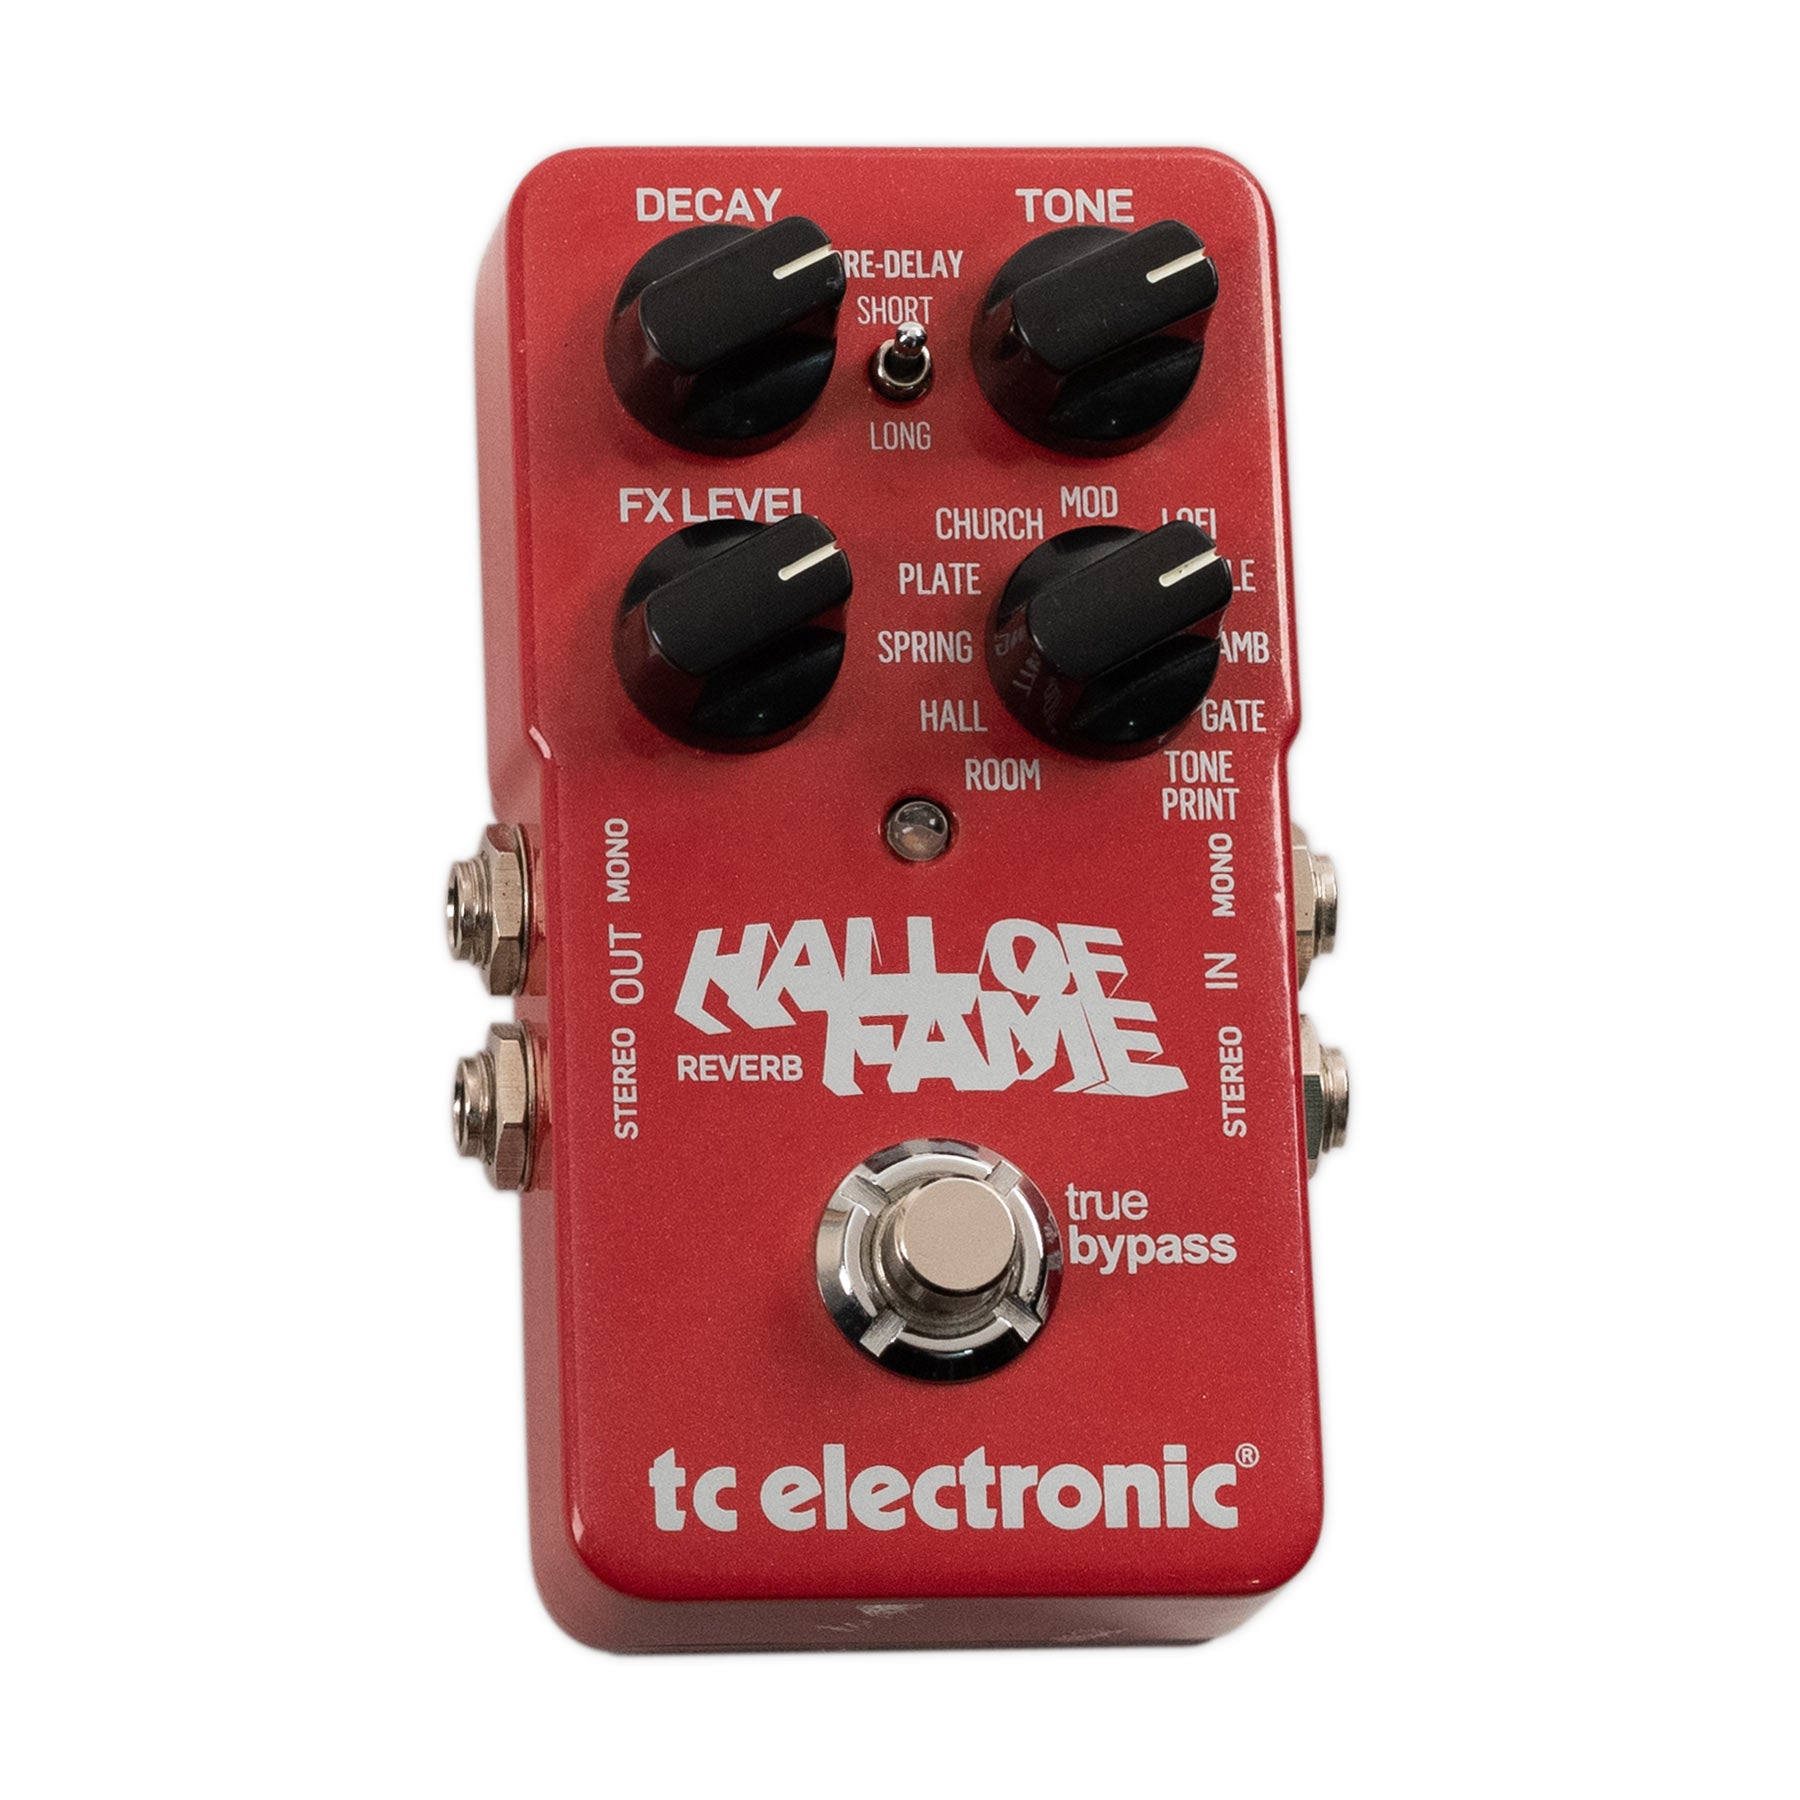 USED TC ELECTRONIC HALL OF FAME REVERB